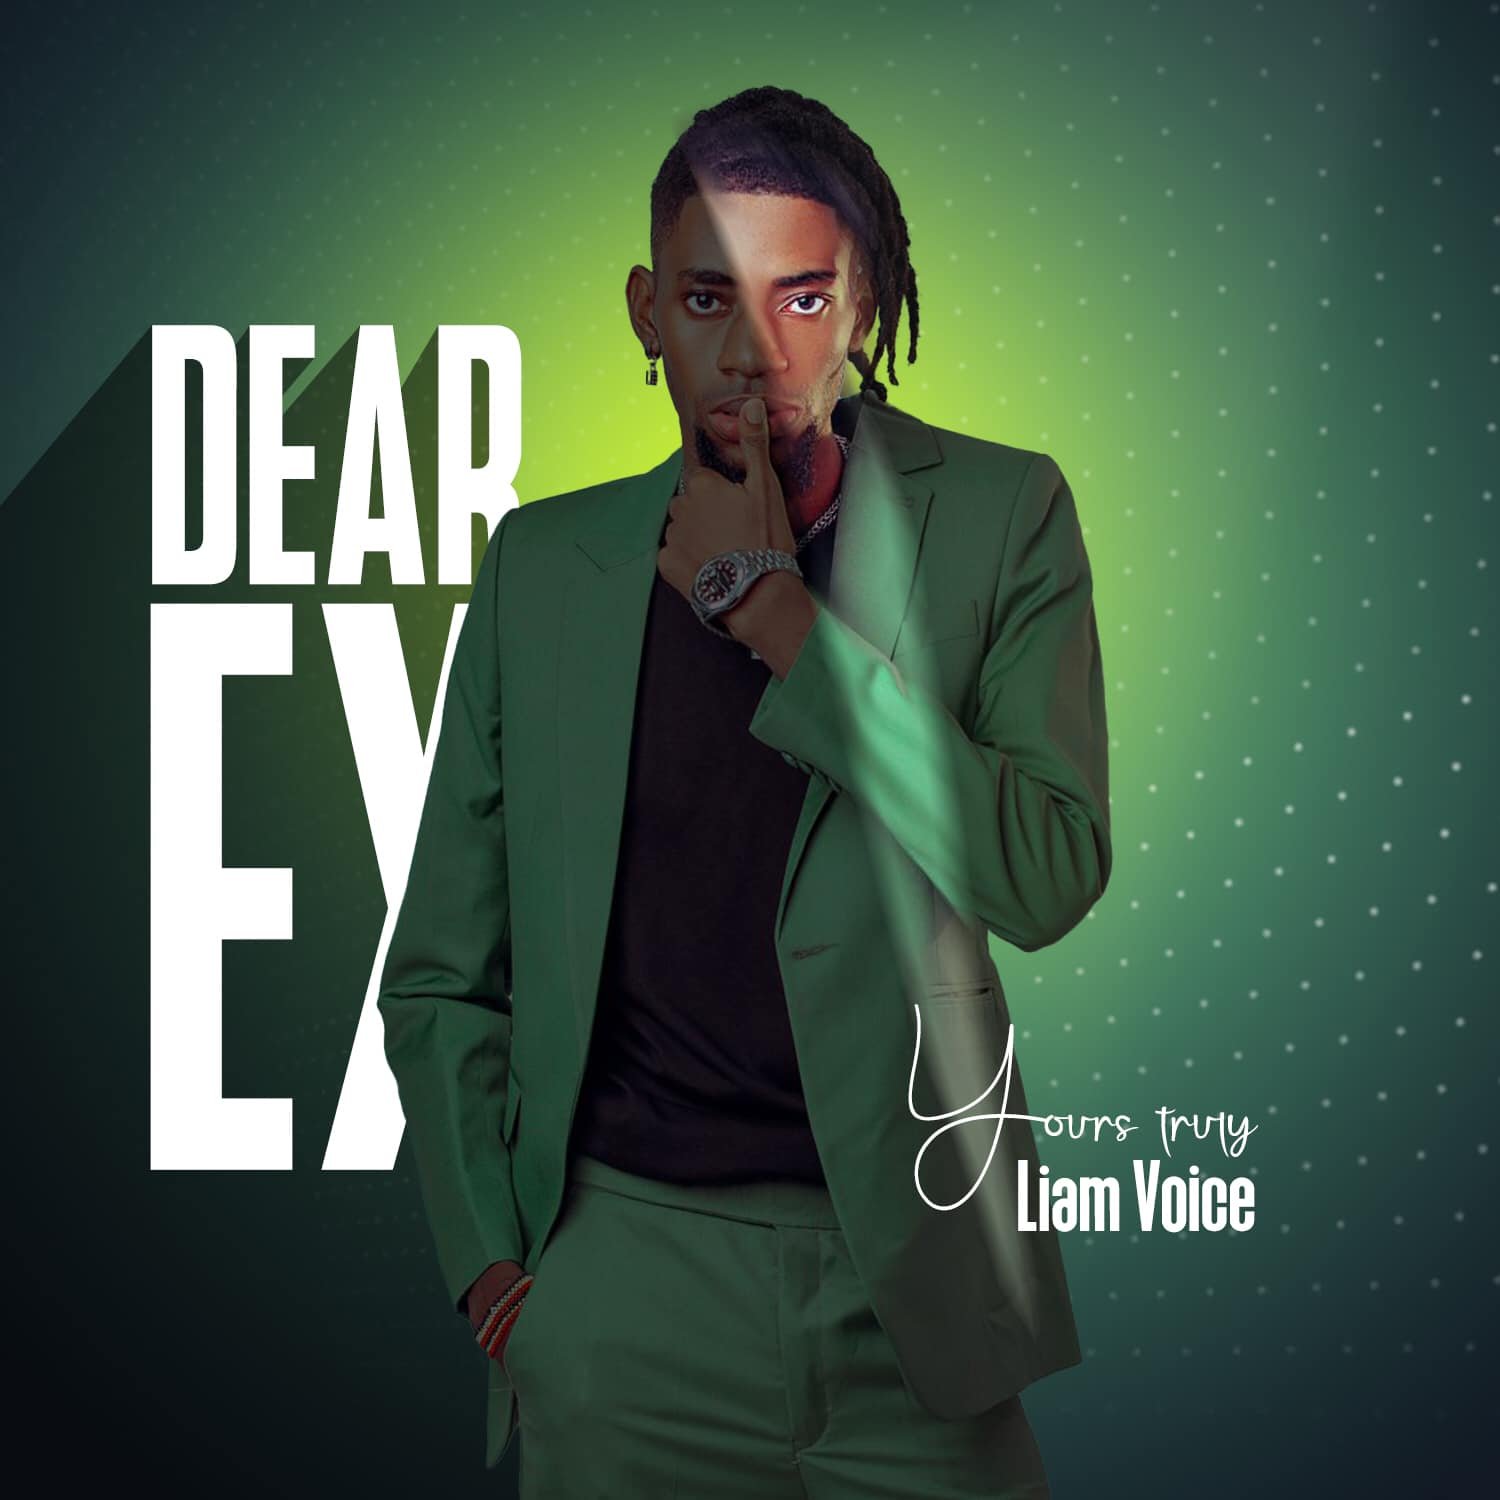 Dear Ex By Liam Voice Free MP3 download on ugamusic.ug